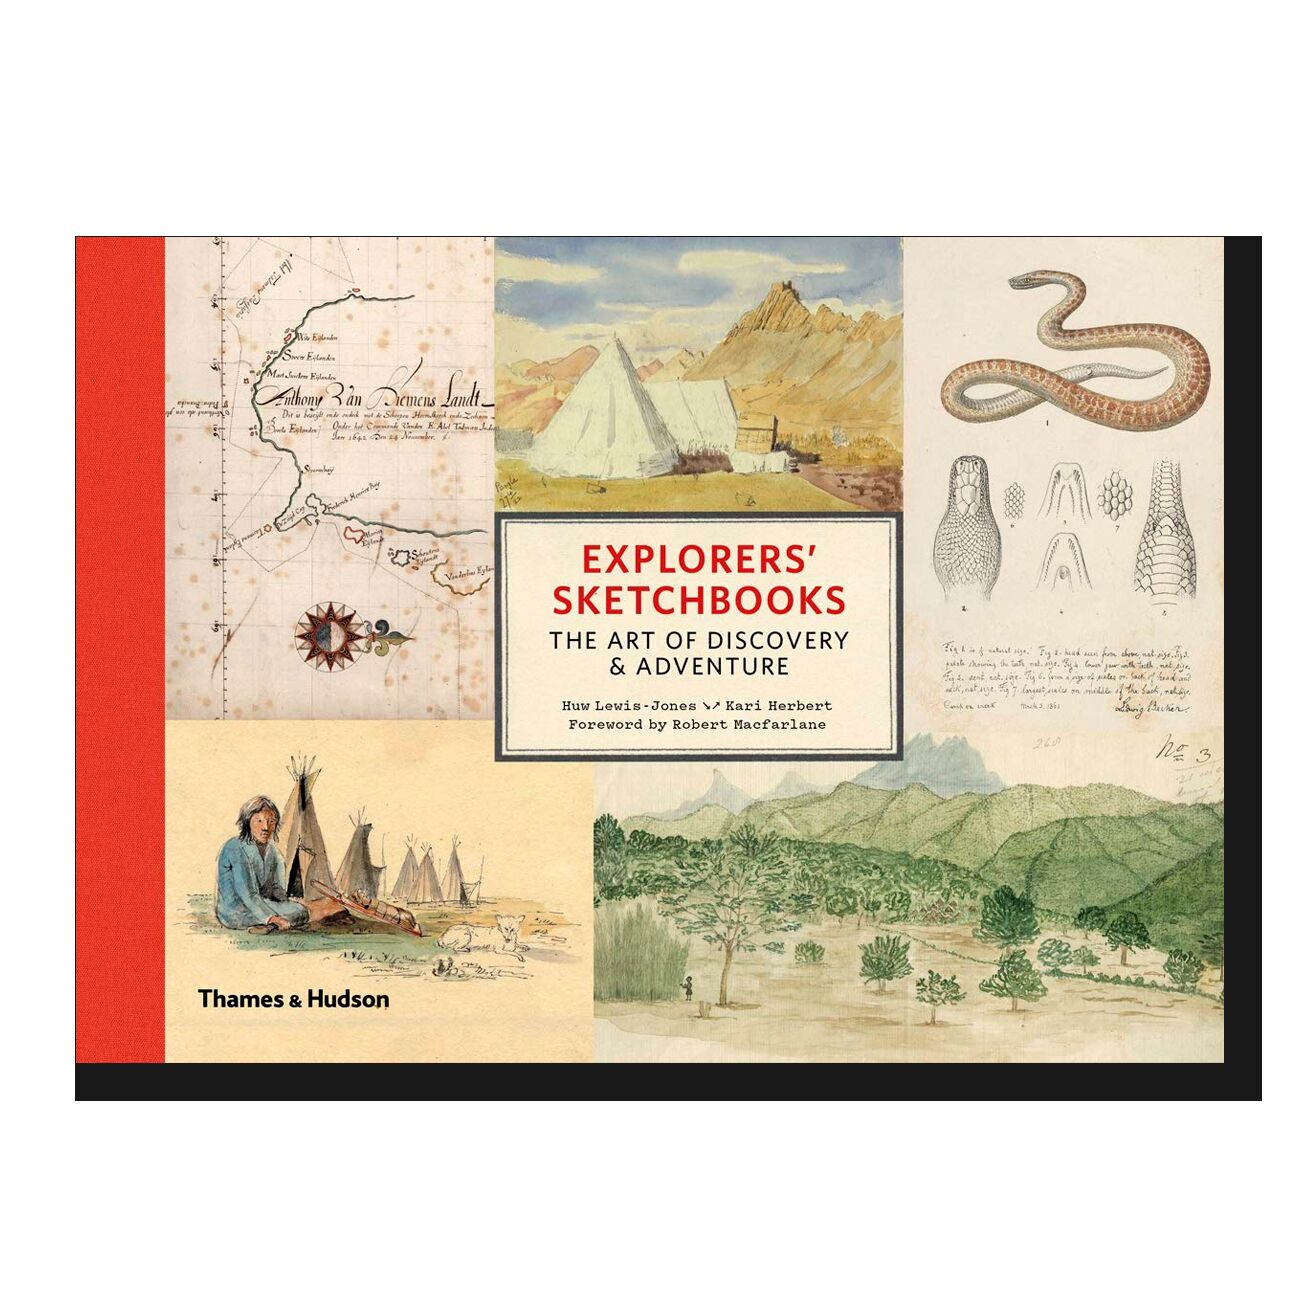 Explorer's Sketchbooks: The Art of Discovery & Adventure